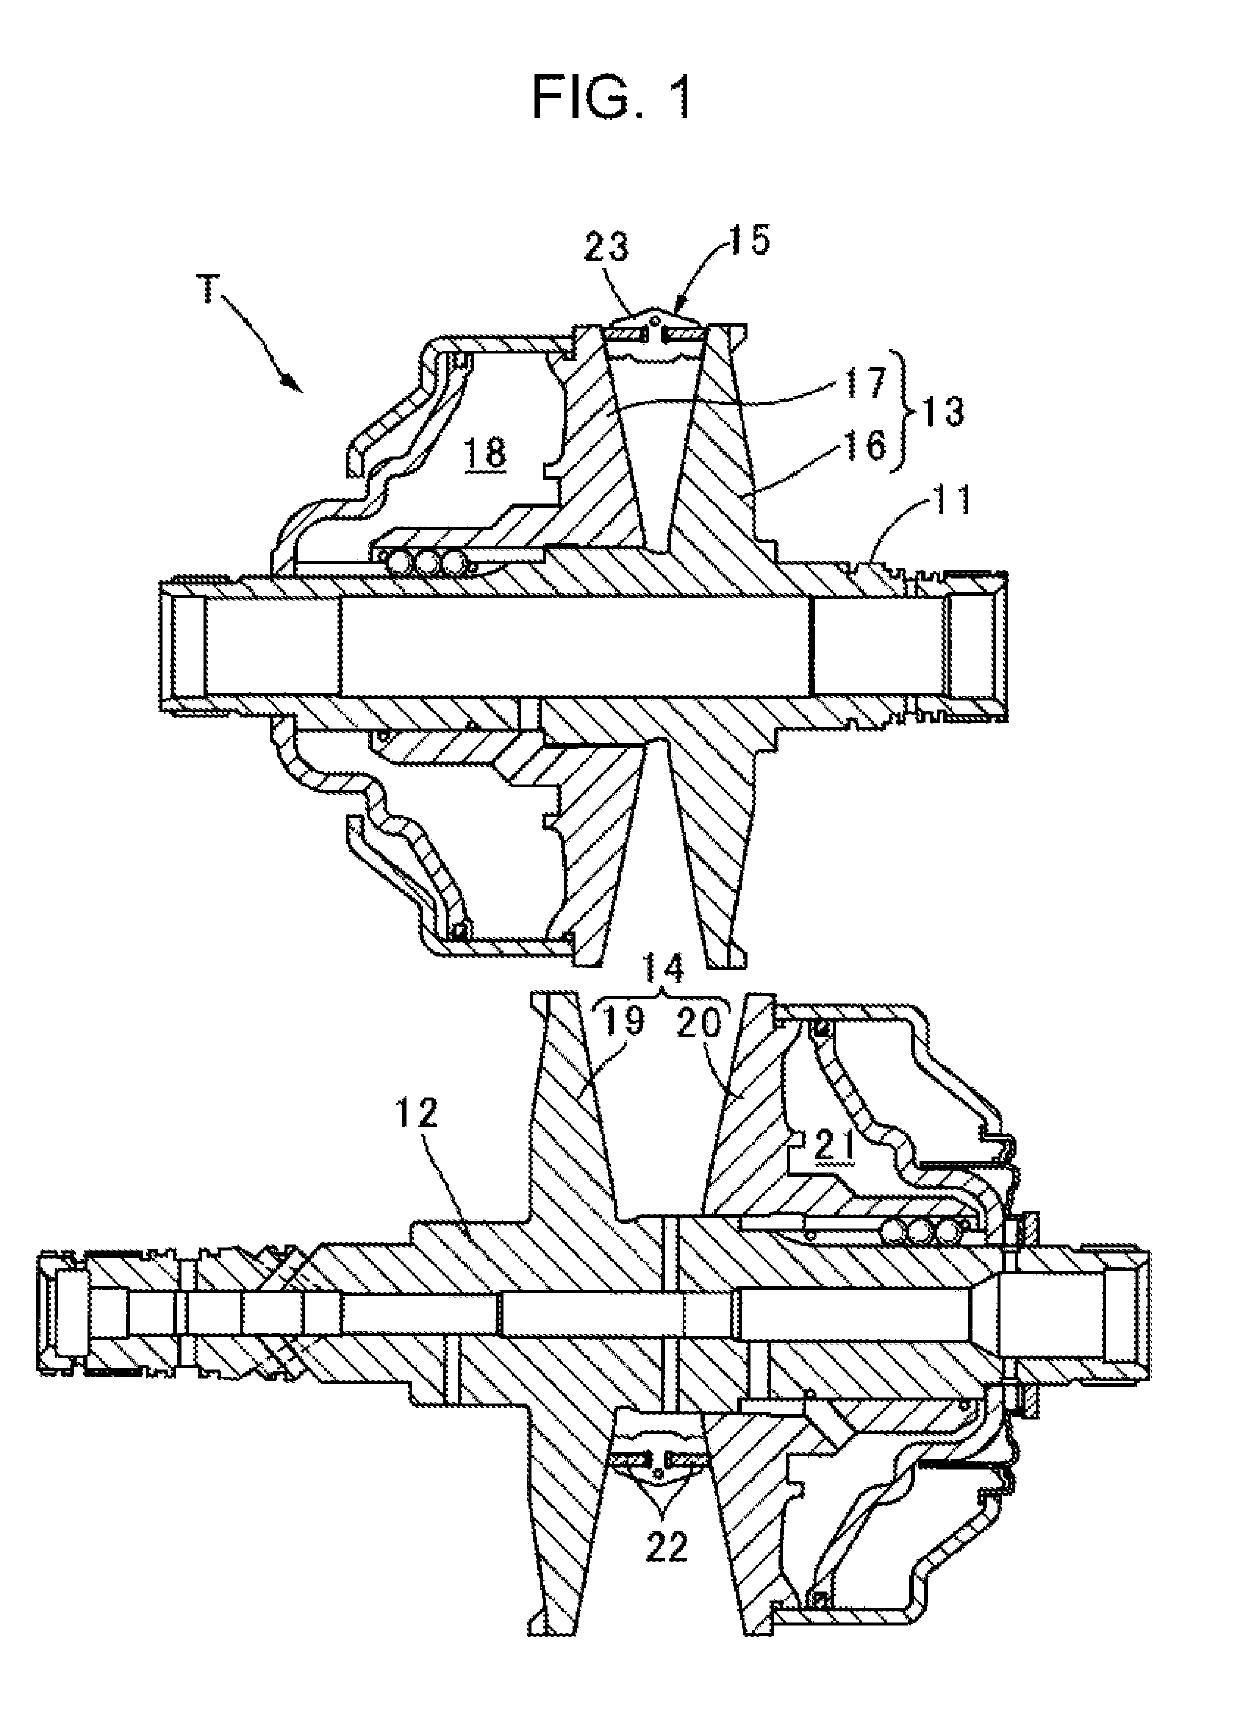 Metal element for continuously variable transmission and method of manufacture the same